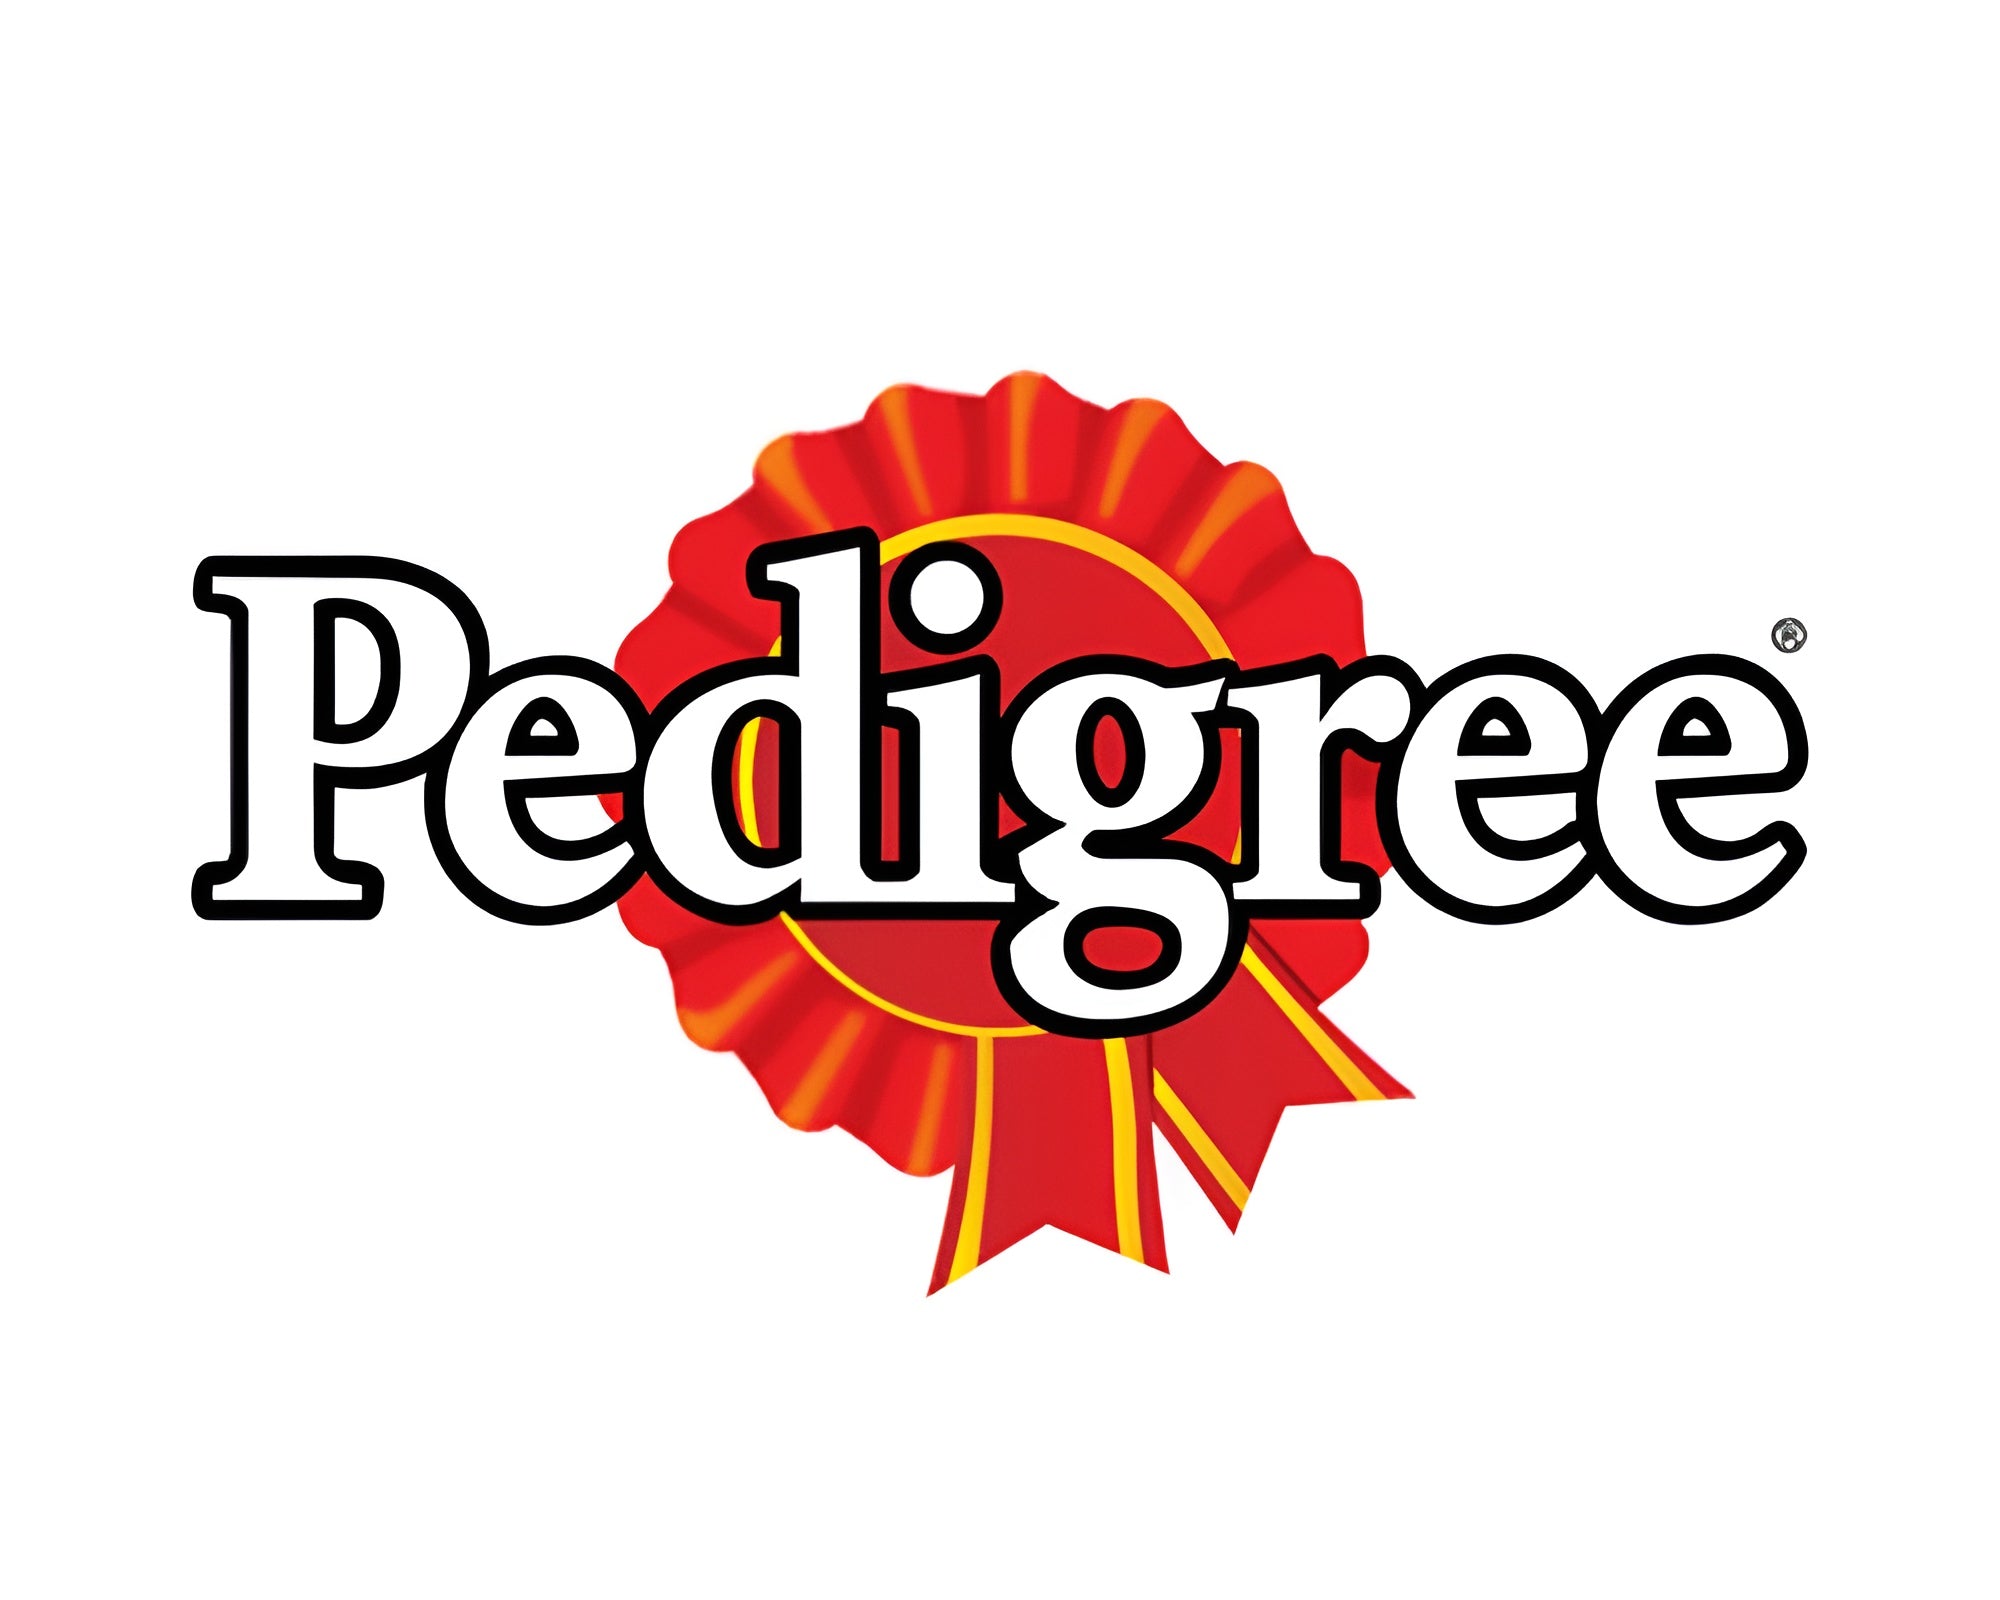 Pedigree pet food logo featuring the brand name with a red ribbon rosette design element.